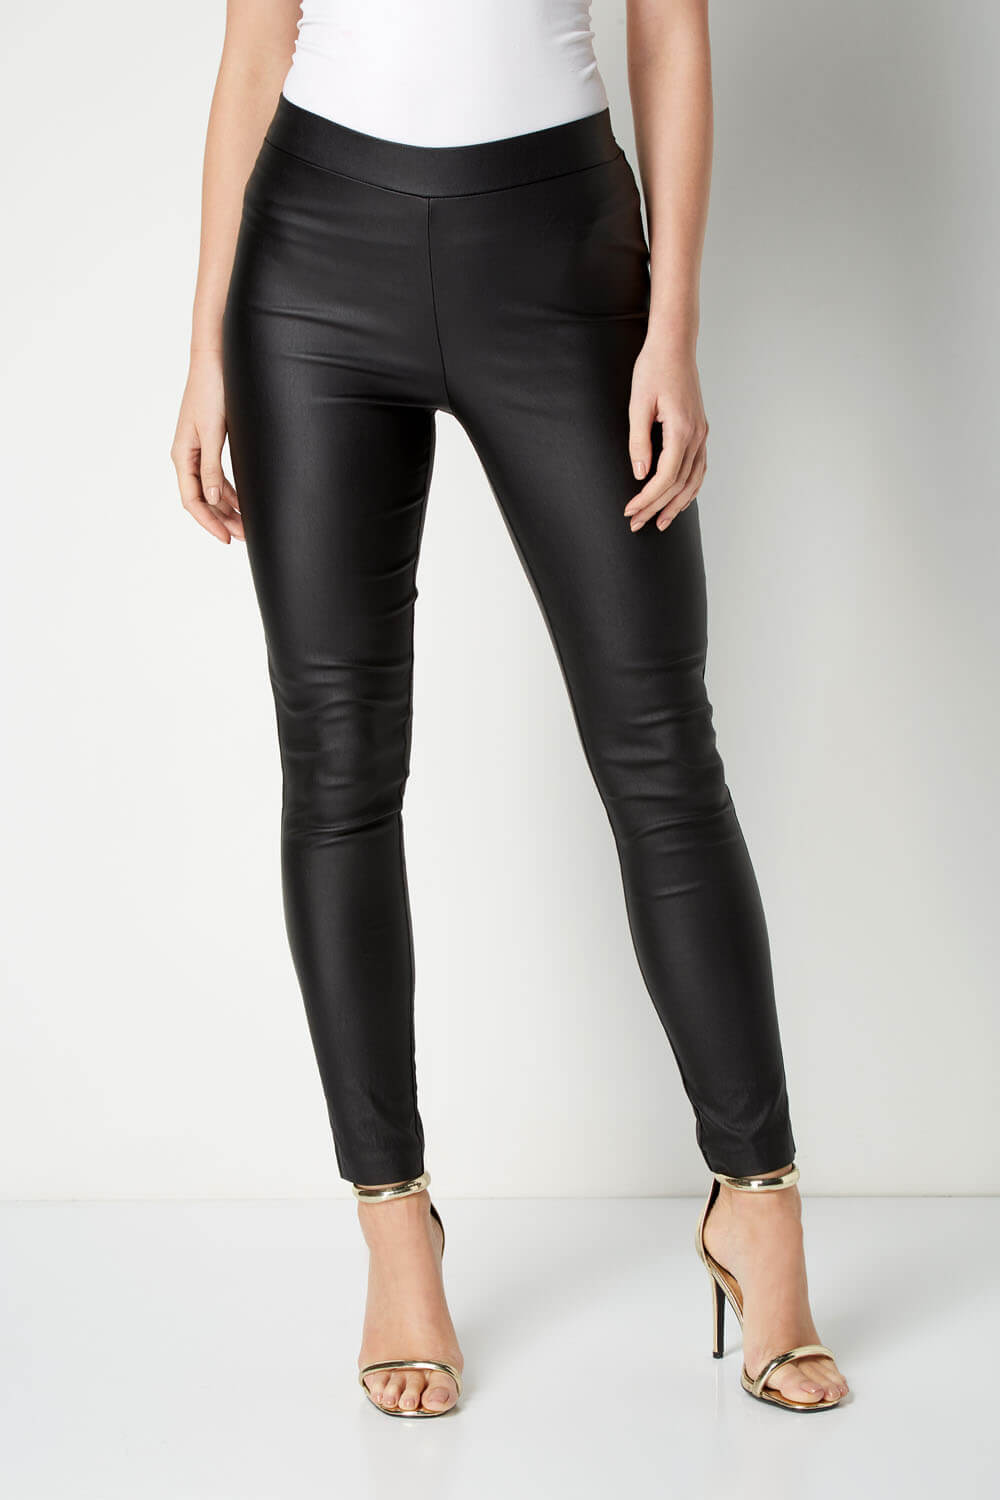 Leather Leggings Wholesale Uk | International Society of Precision  Agriculture